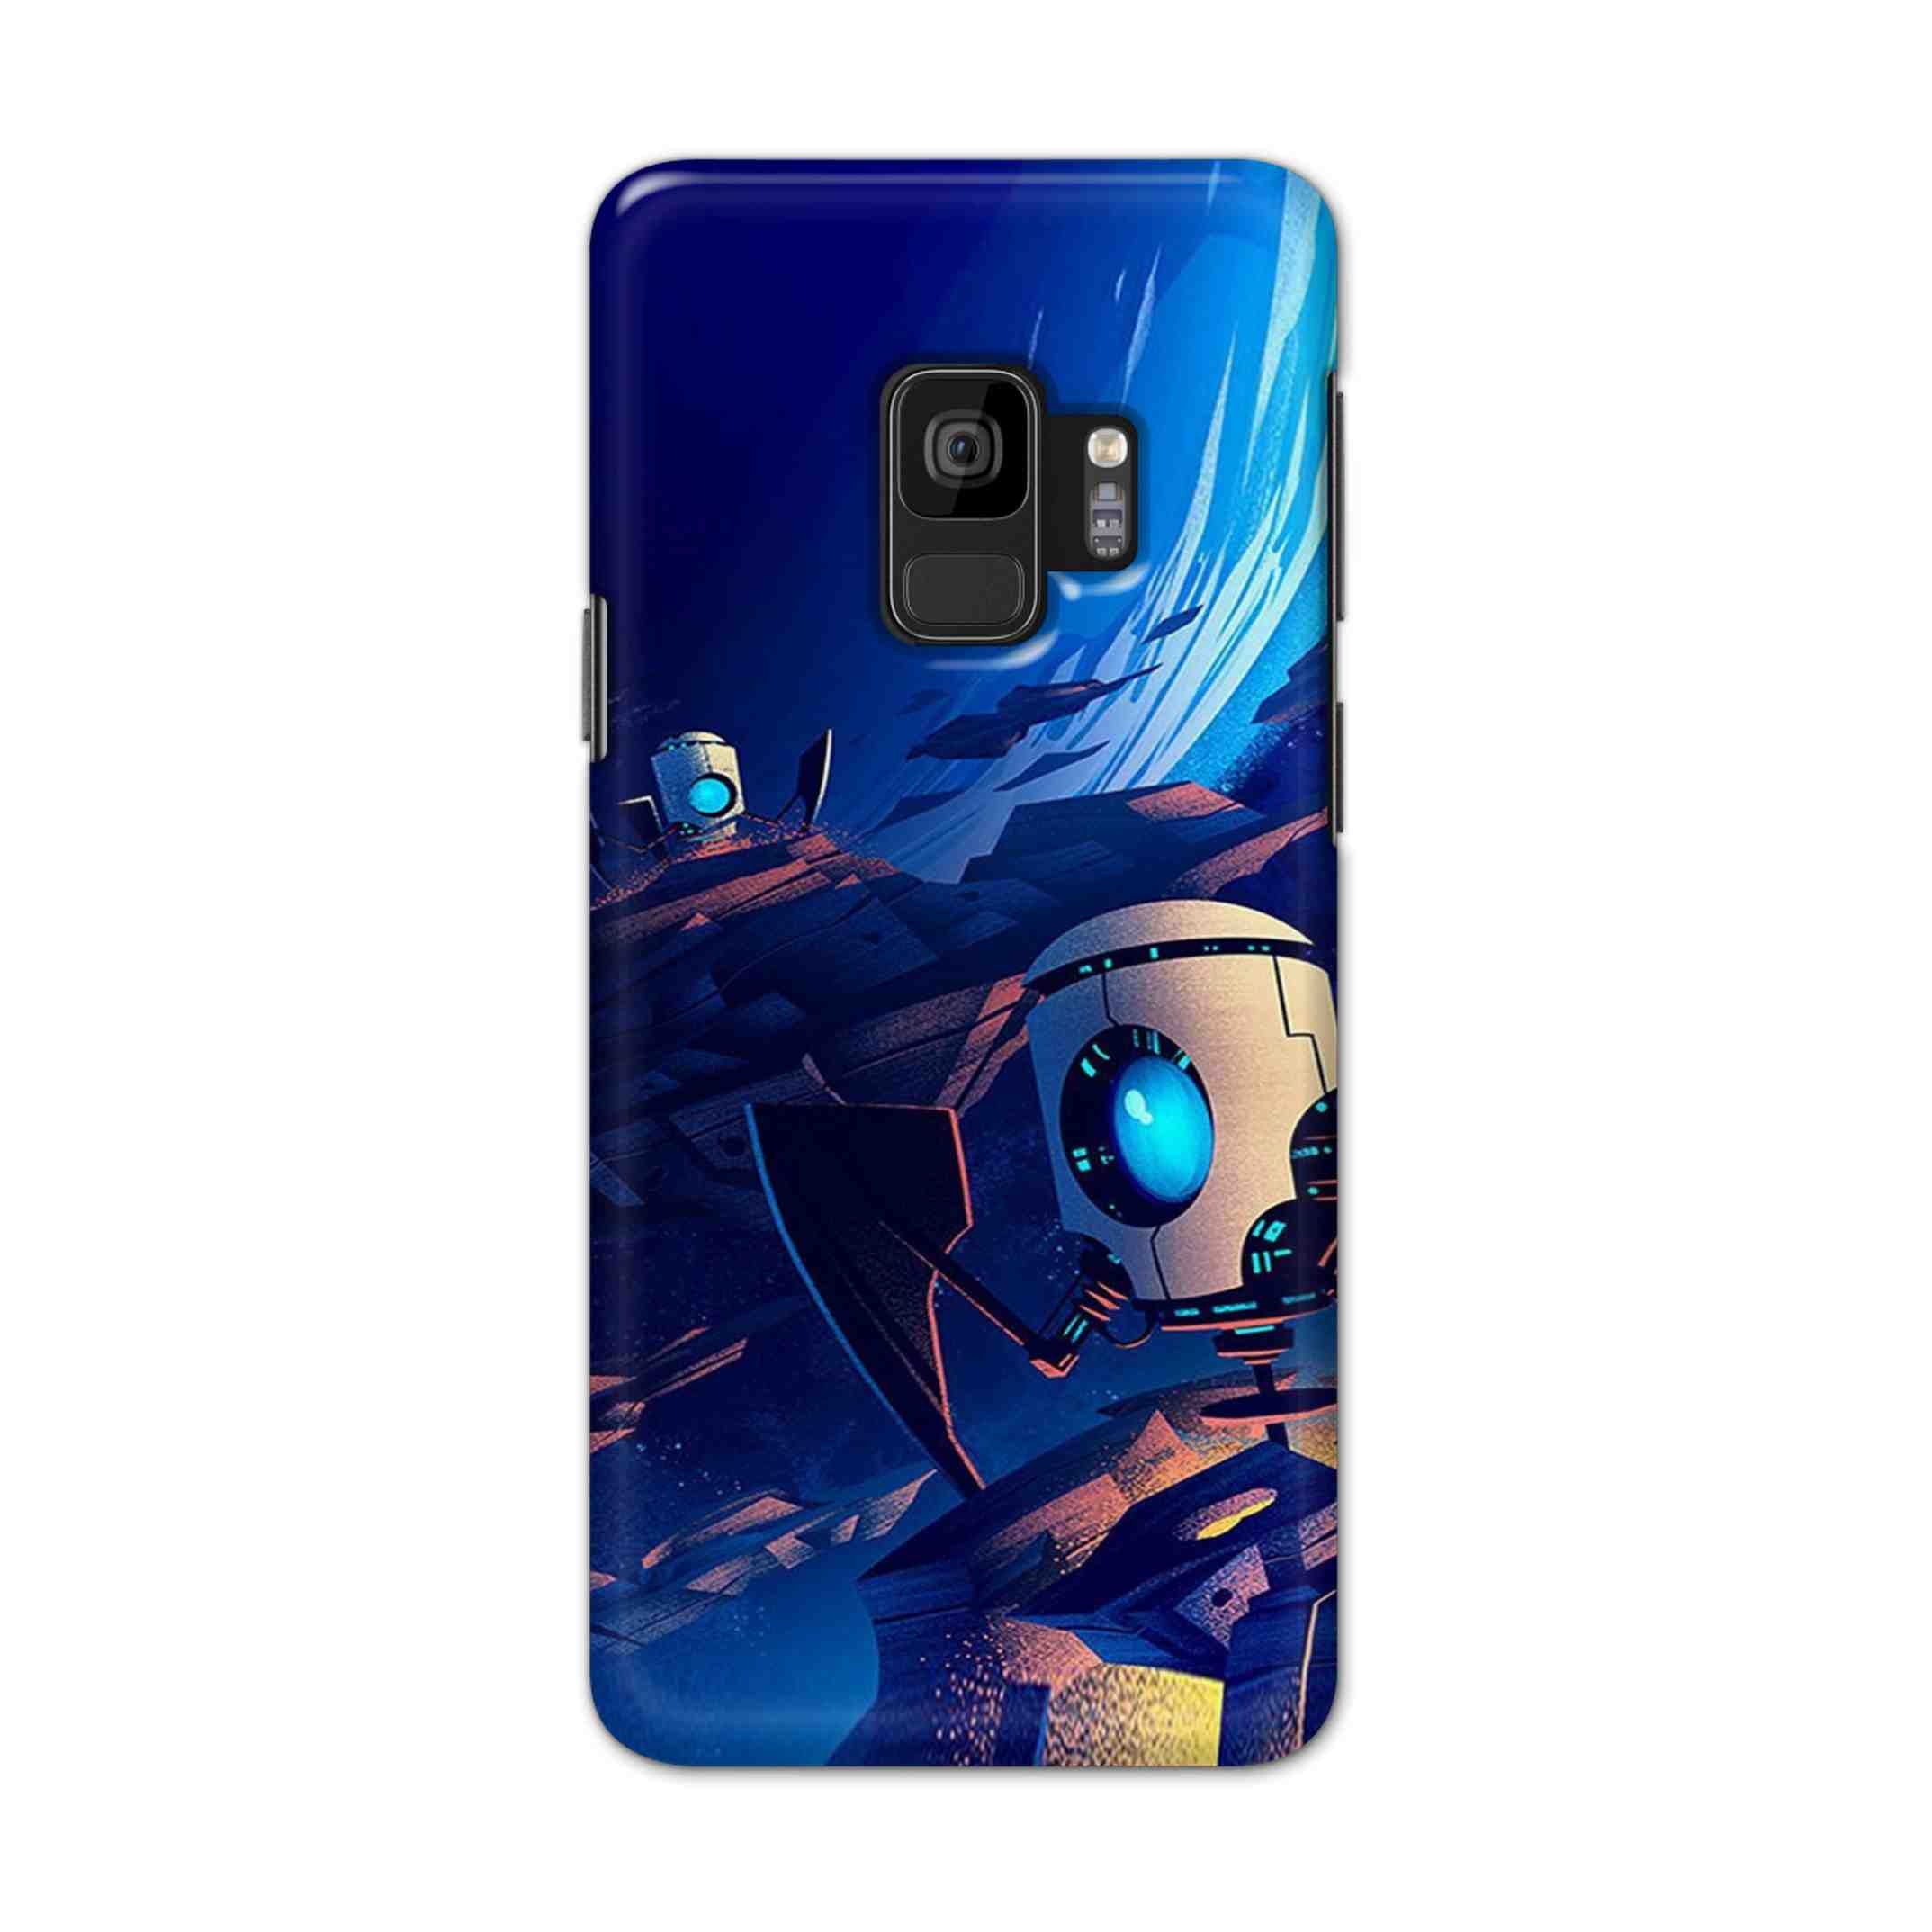 Buy Spaceship Robot Hard Back Mobile Phone Case Cover For Samsung S9 Online